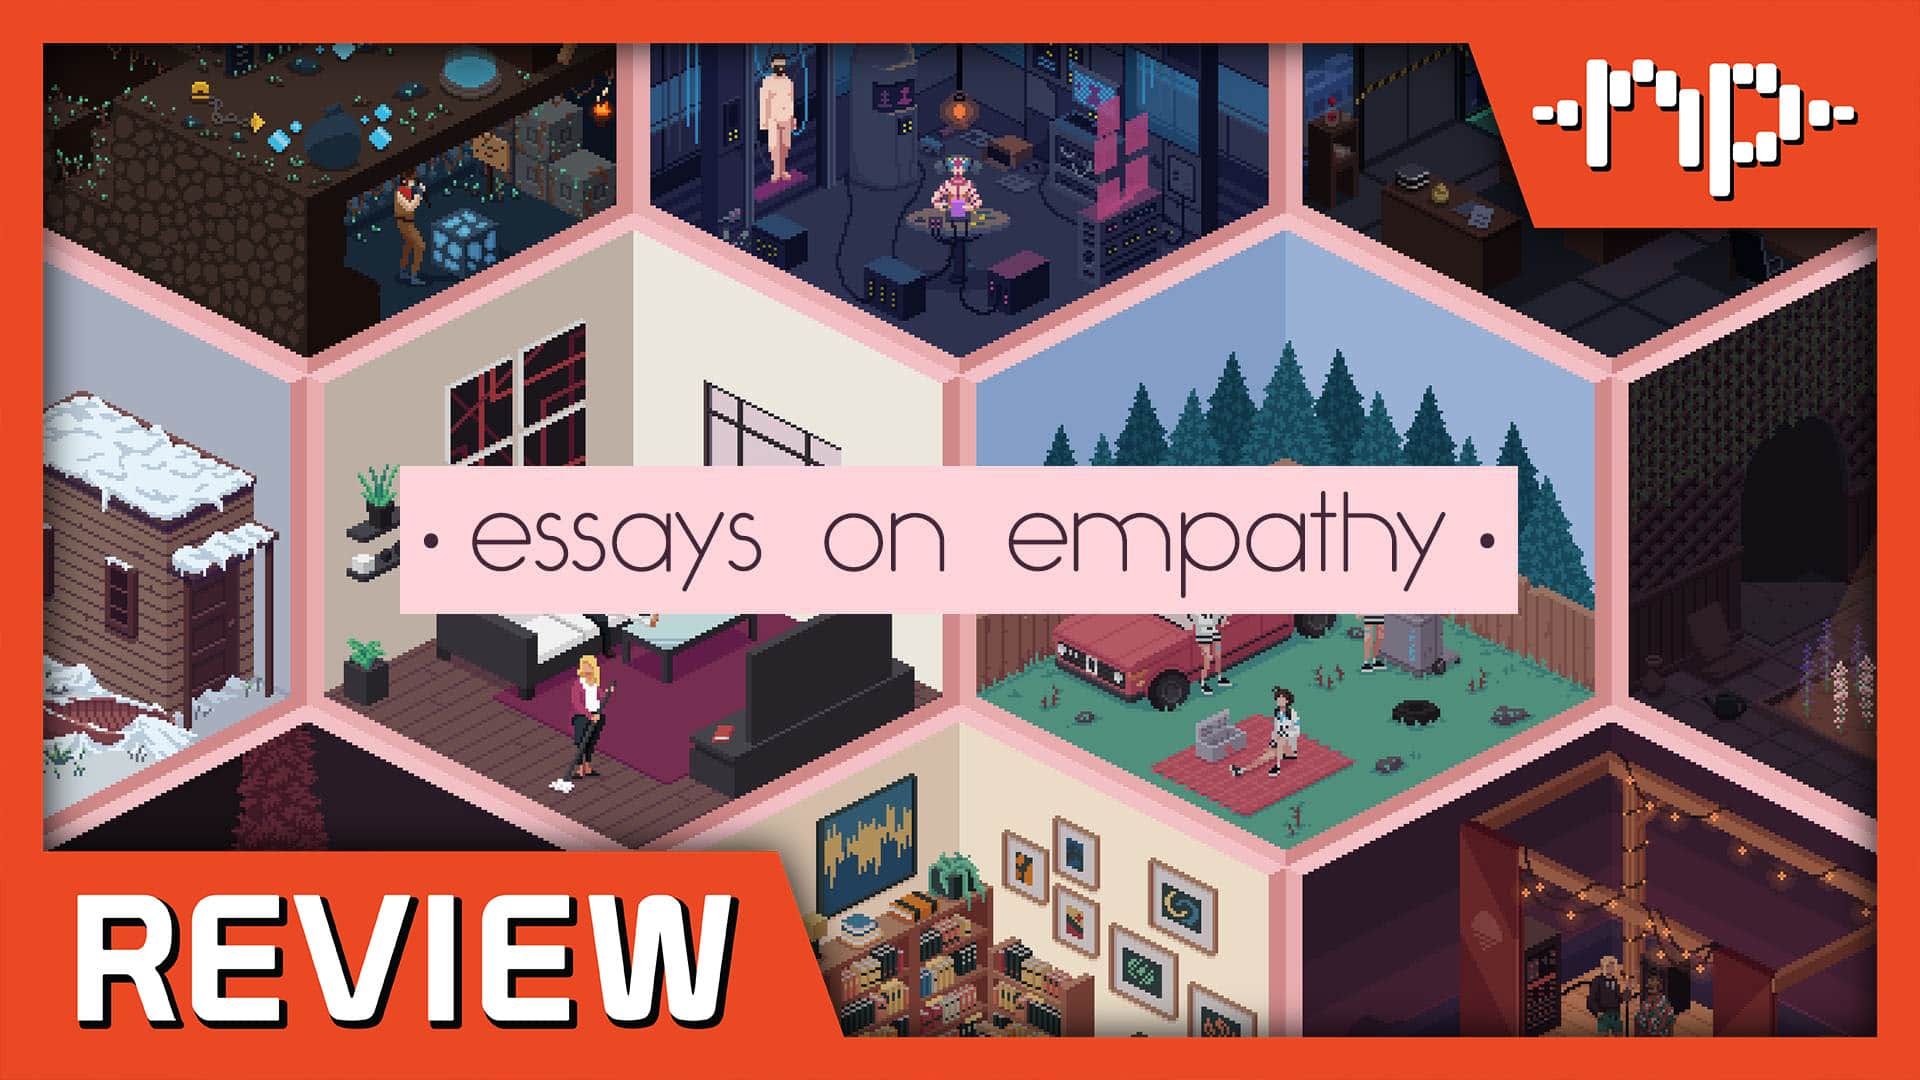 Essays on Empathy Review – An Experimental Collection